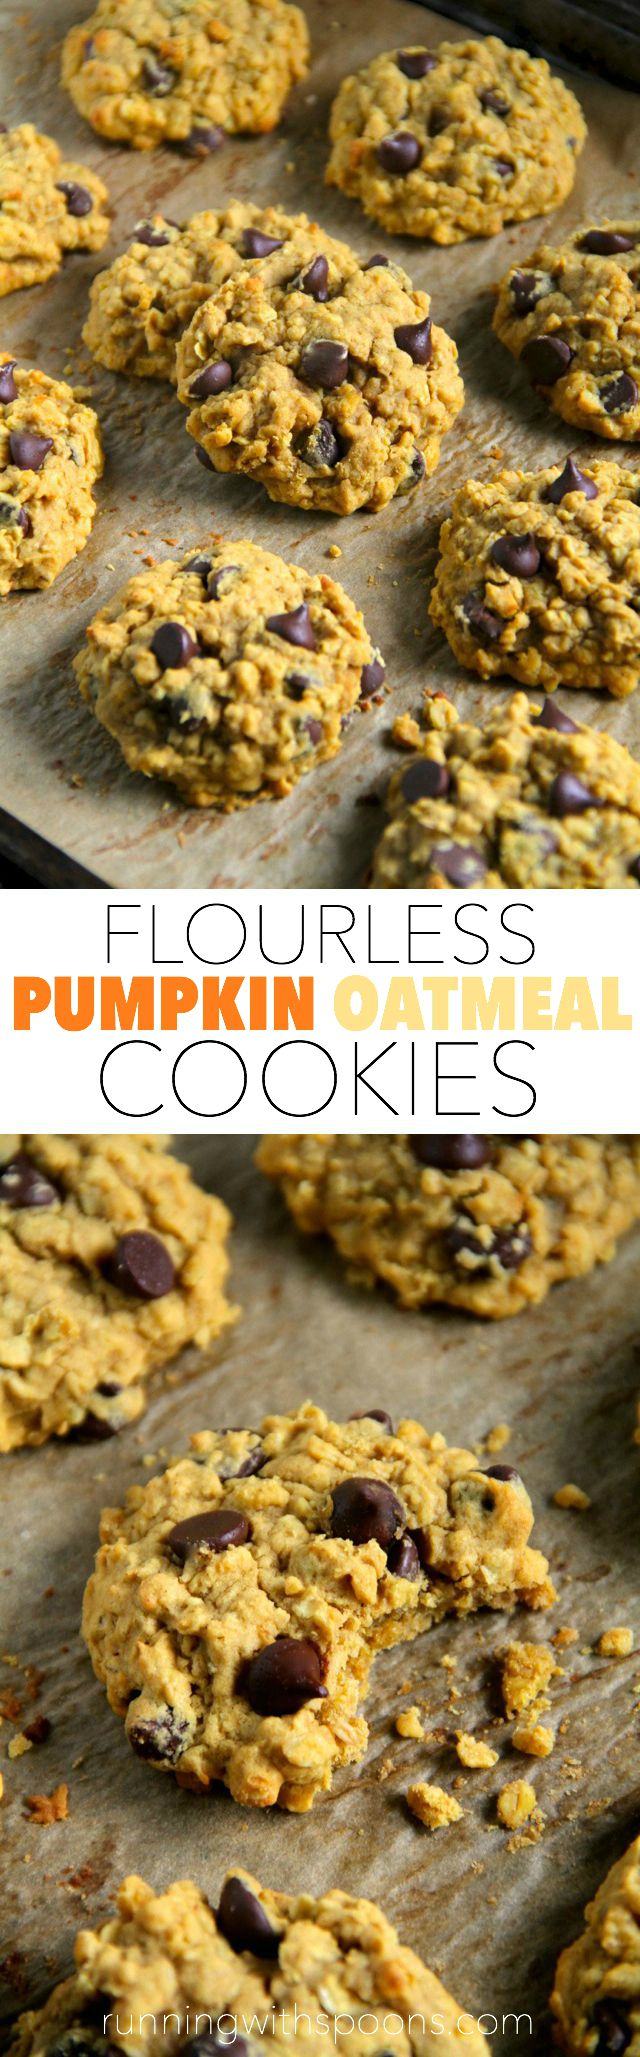 Flourless Pumpkin Oatmeal Cookies -- made without butter or flour, but so soft and chewy that you'd never be able to tell! || runningwithspoons.com #pumpkin #cookies #vegan #fall